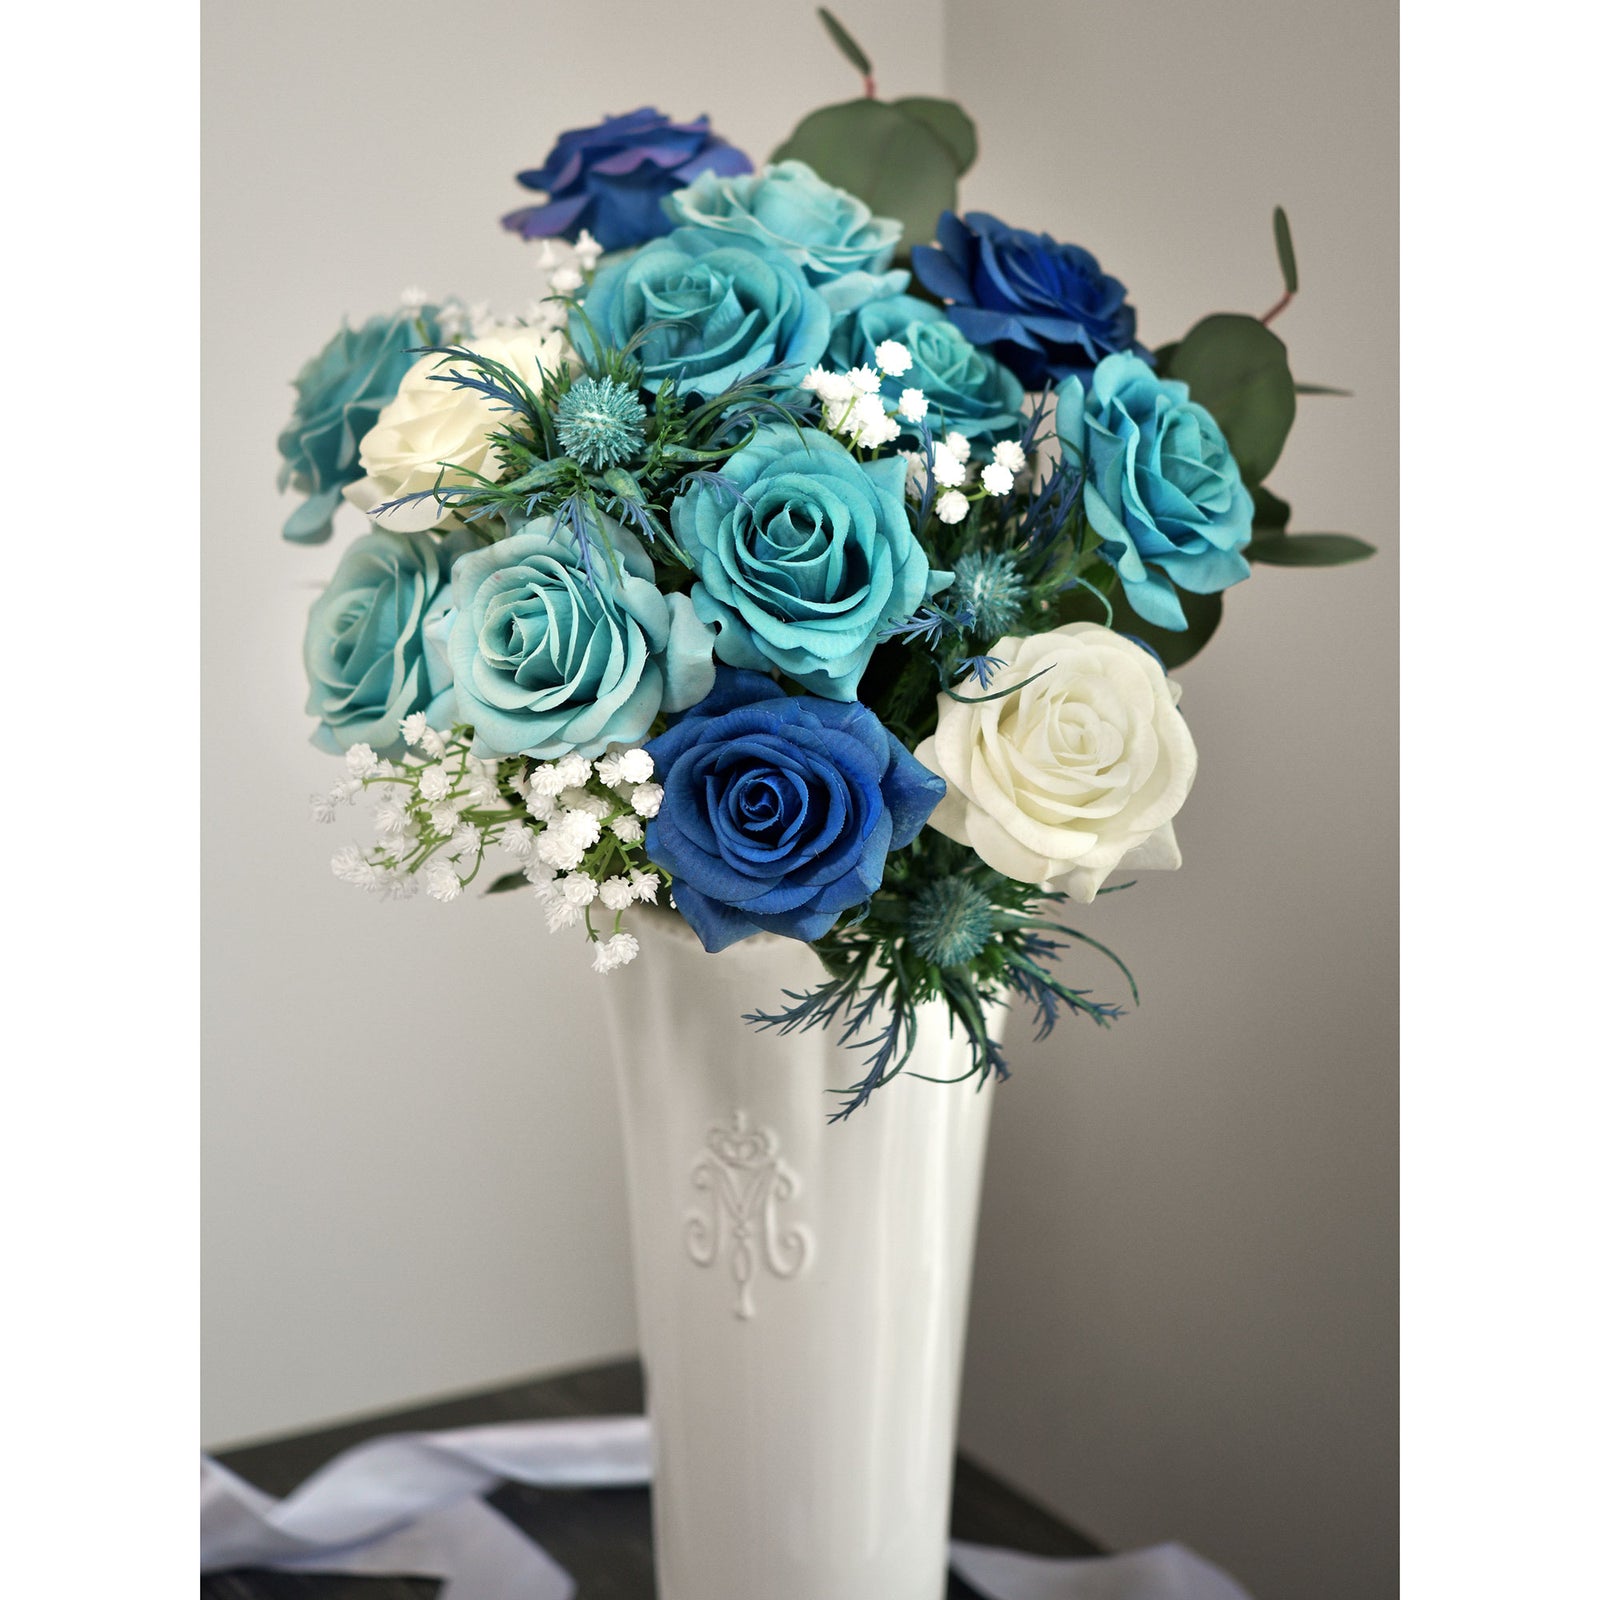 28 PCS DIY Set (POSH BLUE) Real Touch Mix Blue Roses Sea Holly Thistle Artificial Flowers Arrangement Silk Bouquet for Gift Home Wedding Bridal Corporate Gifts